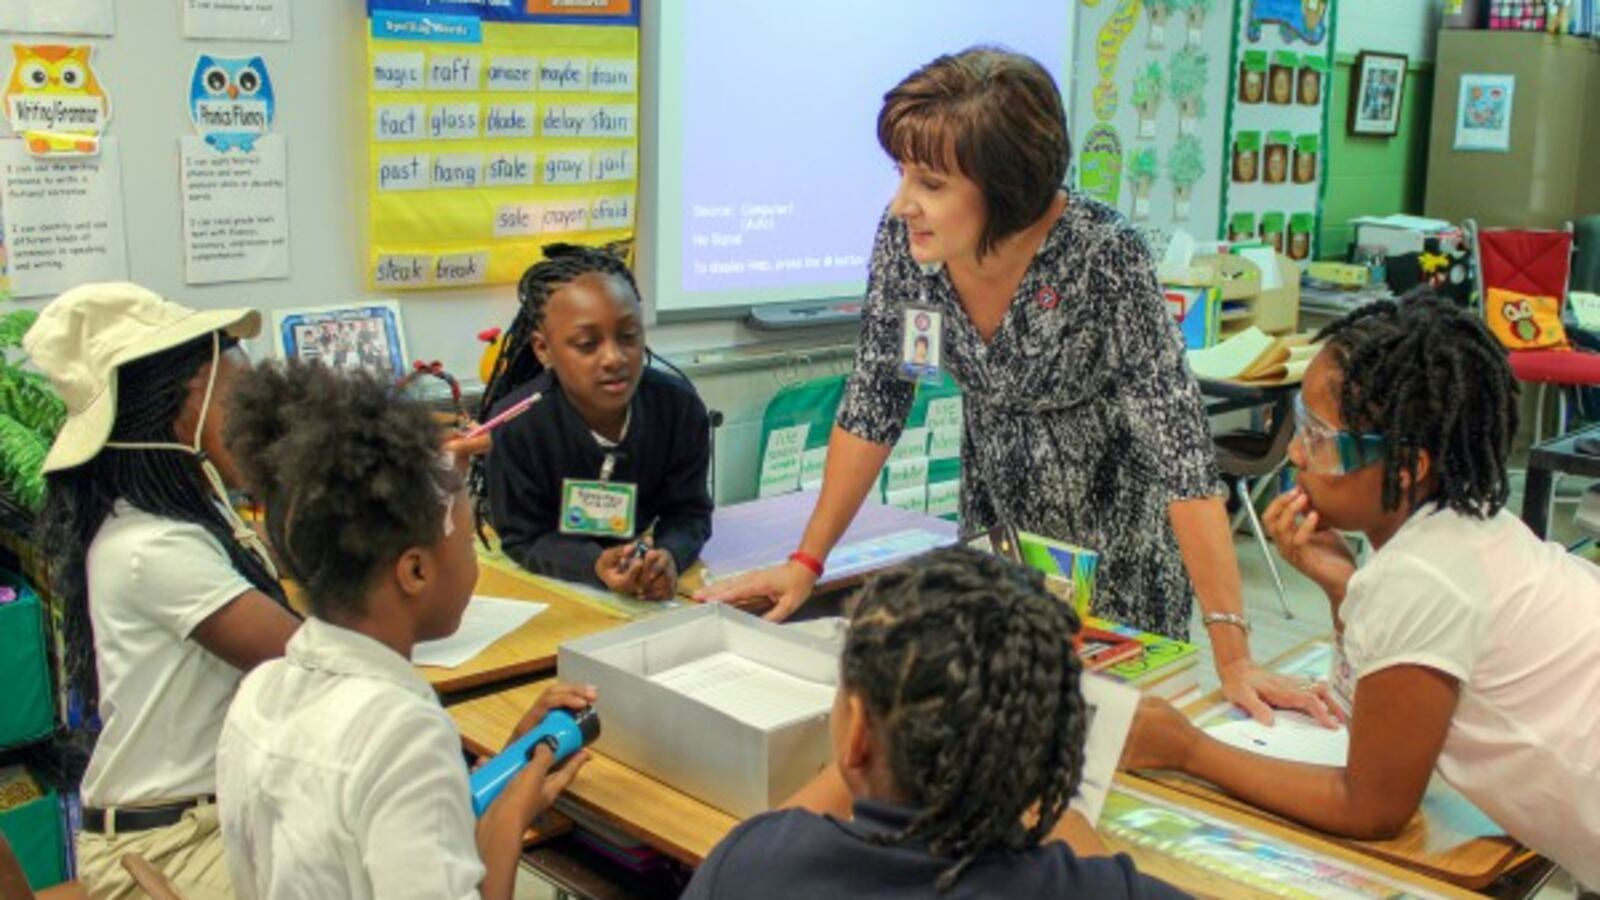 Karen Vogelsang, a former Tennessee Teacher of the Year, was tapped to join Shelby County Schools' leadership team part-time to provide teacher input.